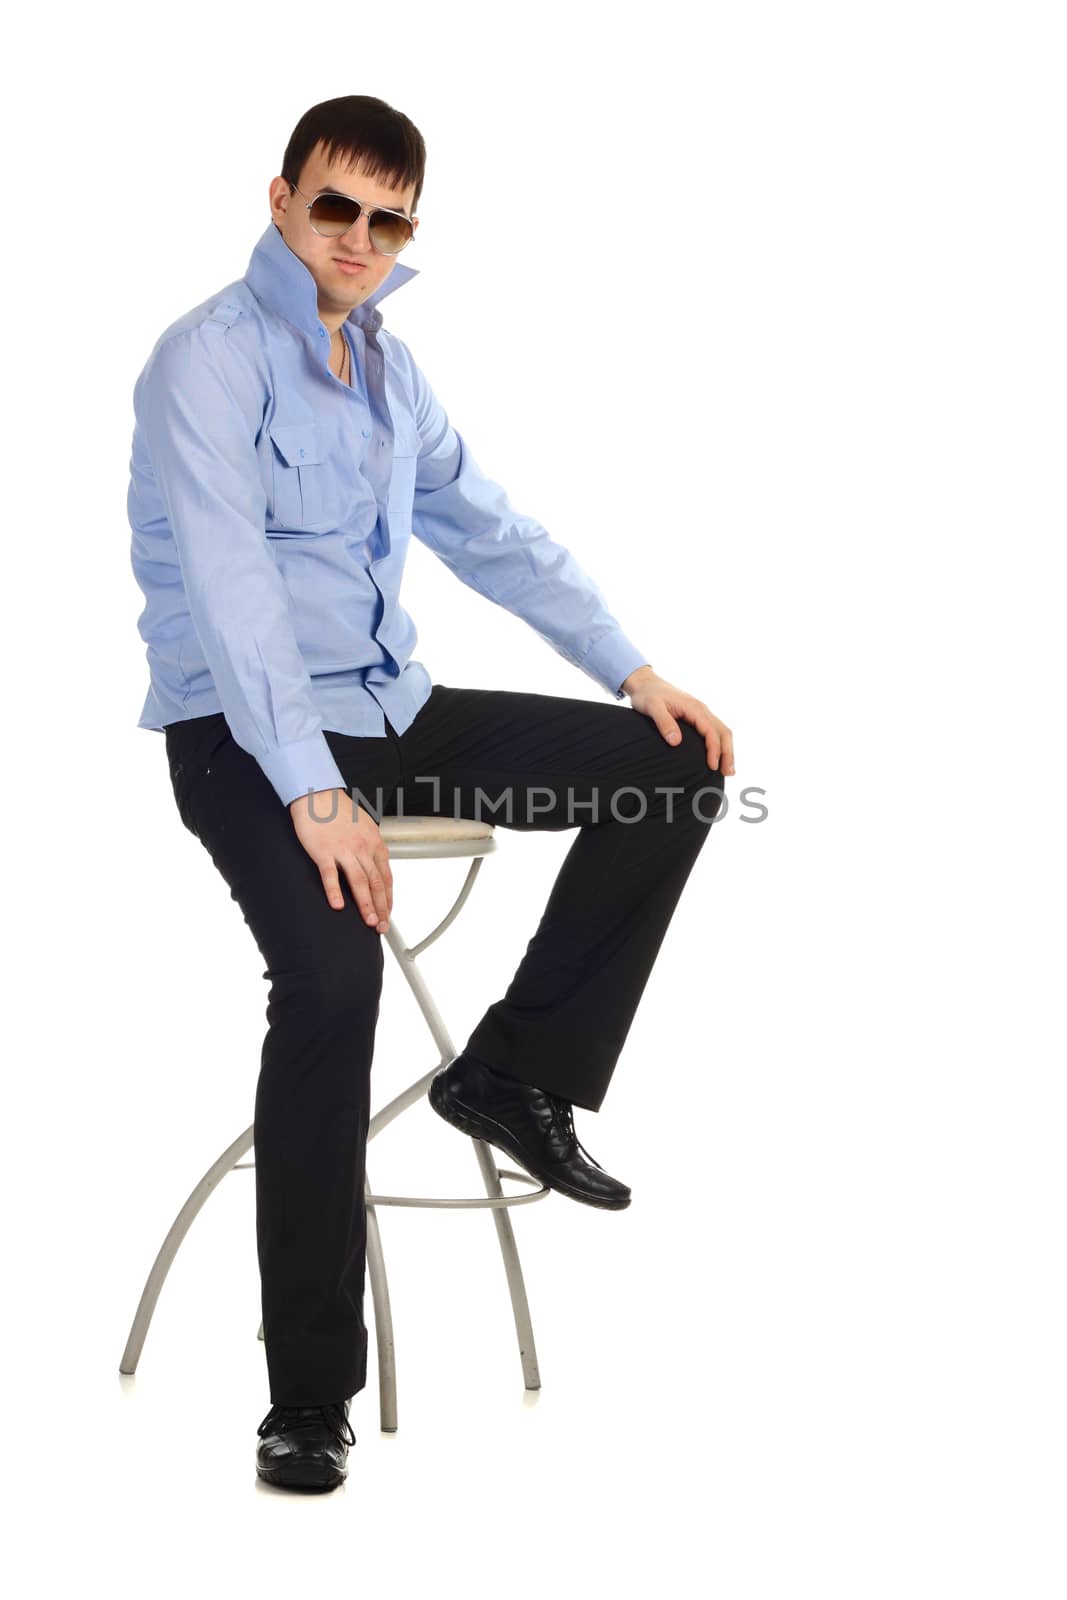 Funny guy sitting on the chair isolated on the white